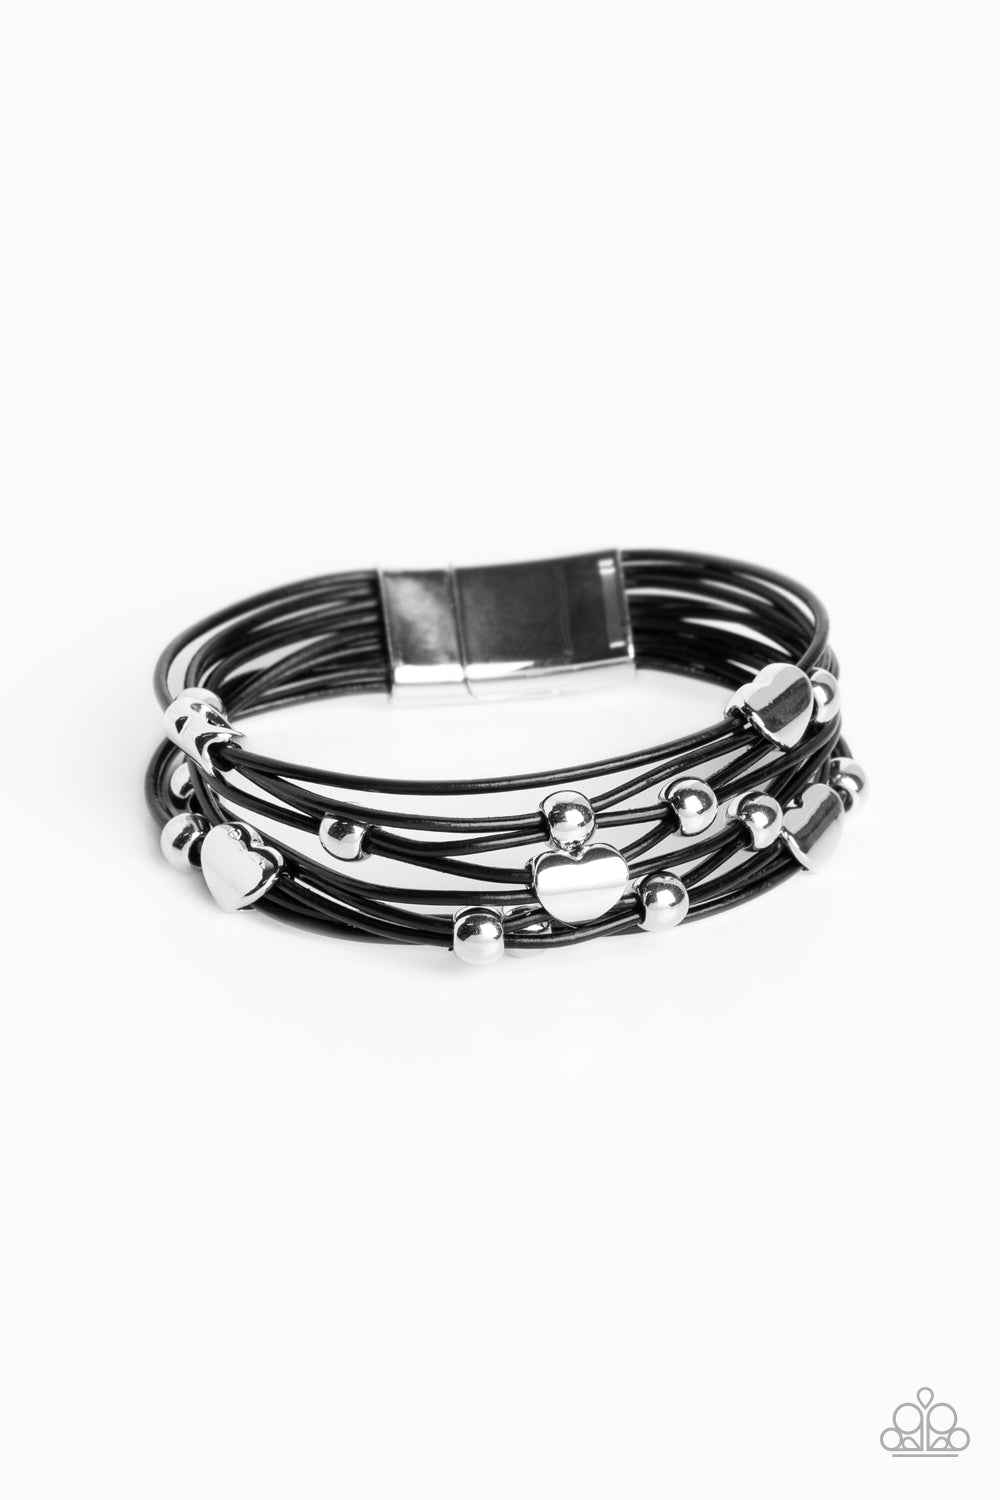 Aphrodite Ascending Black Magnetic Bracelet - Paparazzi Accessories  Row after row of black cords layer around the wrist. Varying sizes of shiny silver beads and curved silver hearts coalesce across the cords in an infatuated pattern for a romantically urban statement. Features a magnetic closure.  Sold as one individual bracelet.